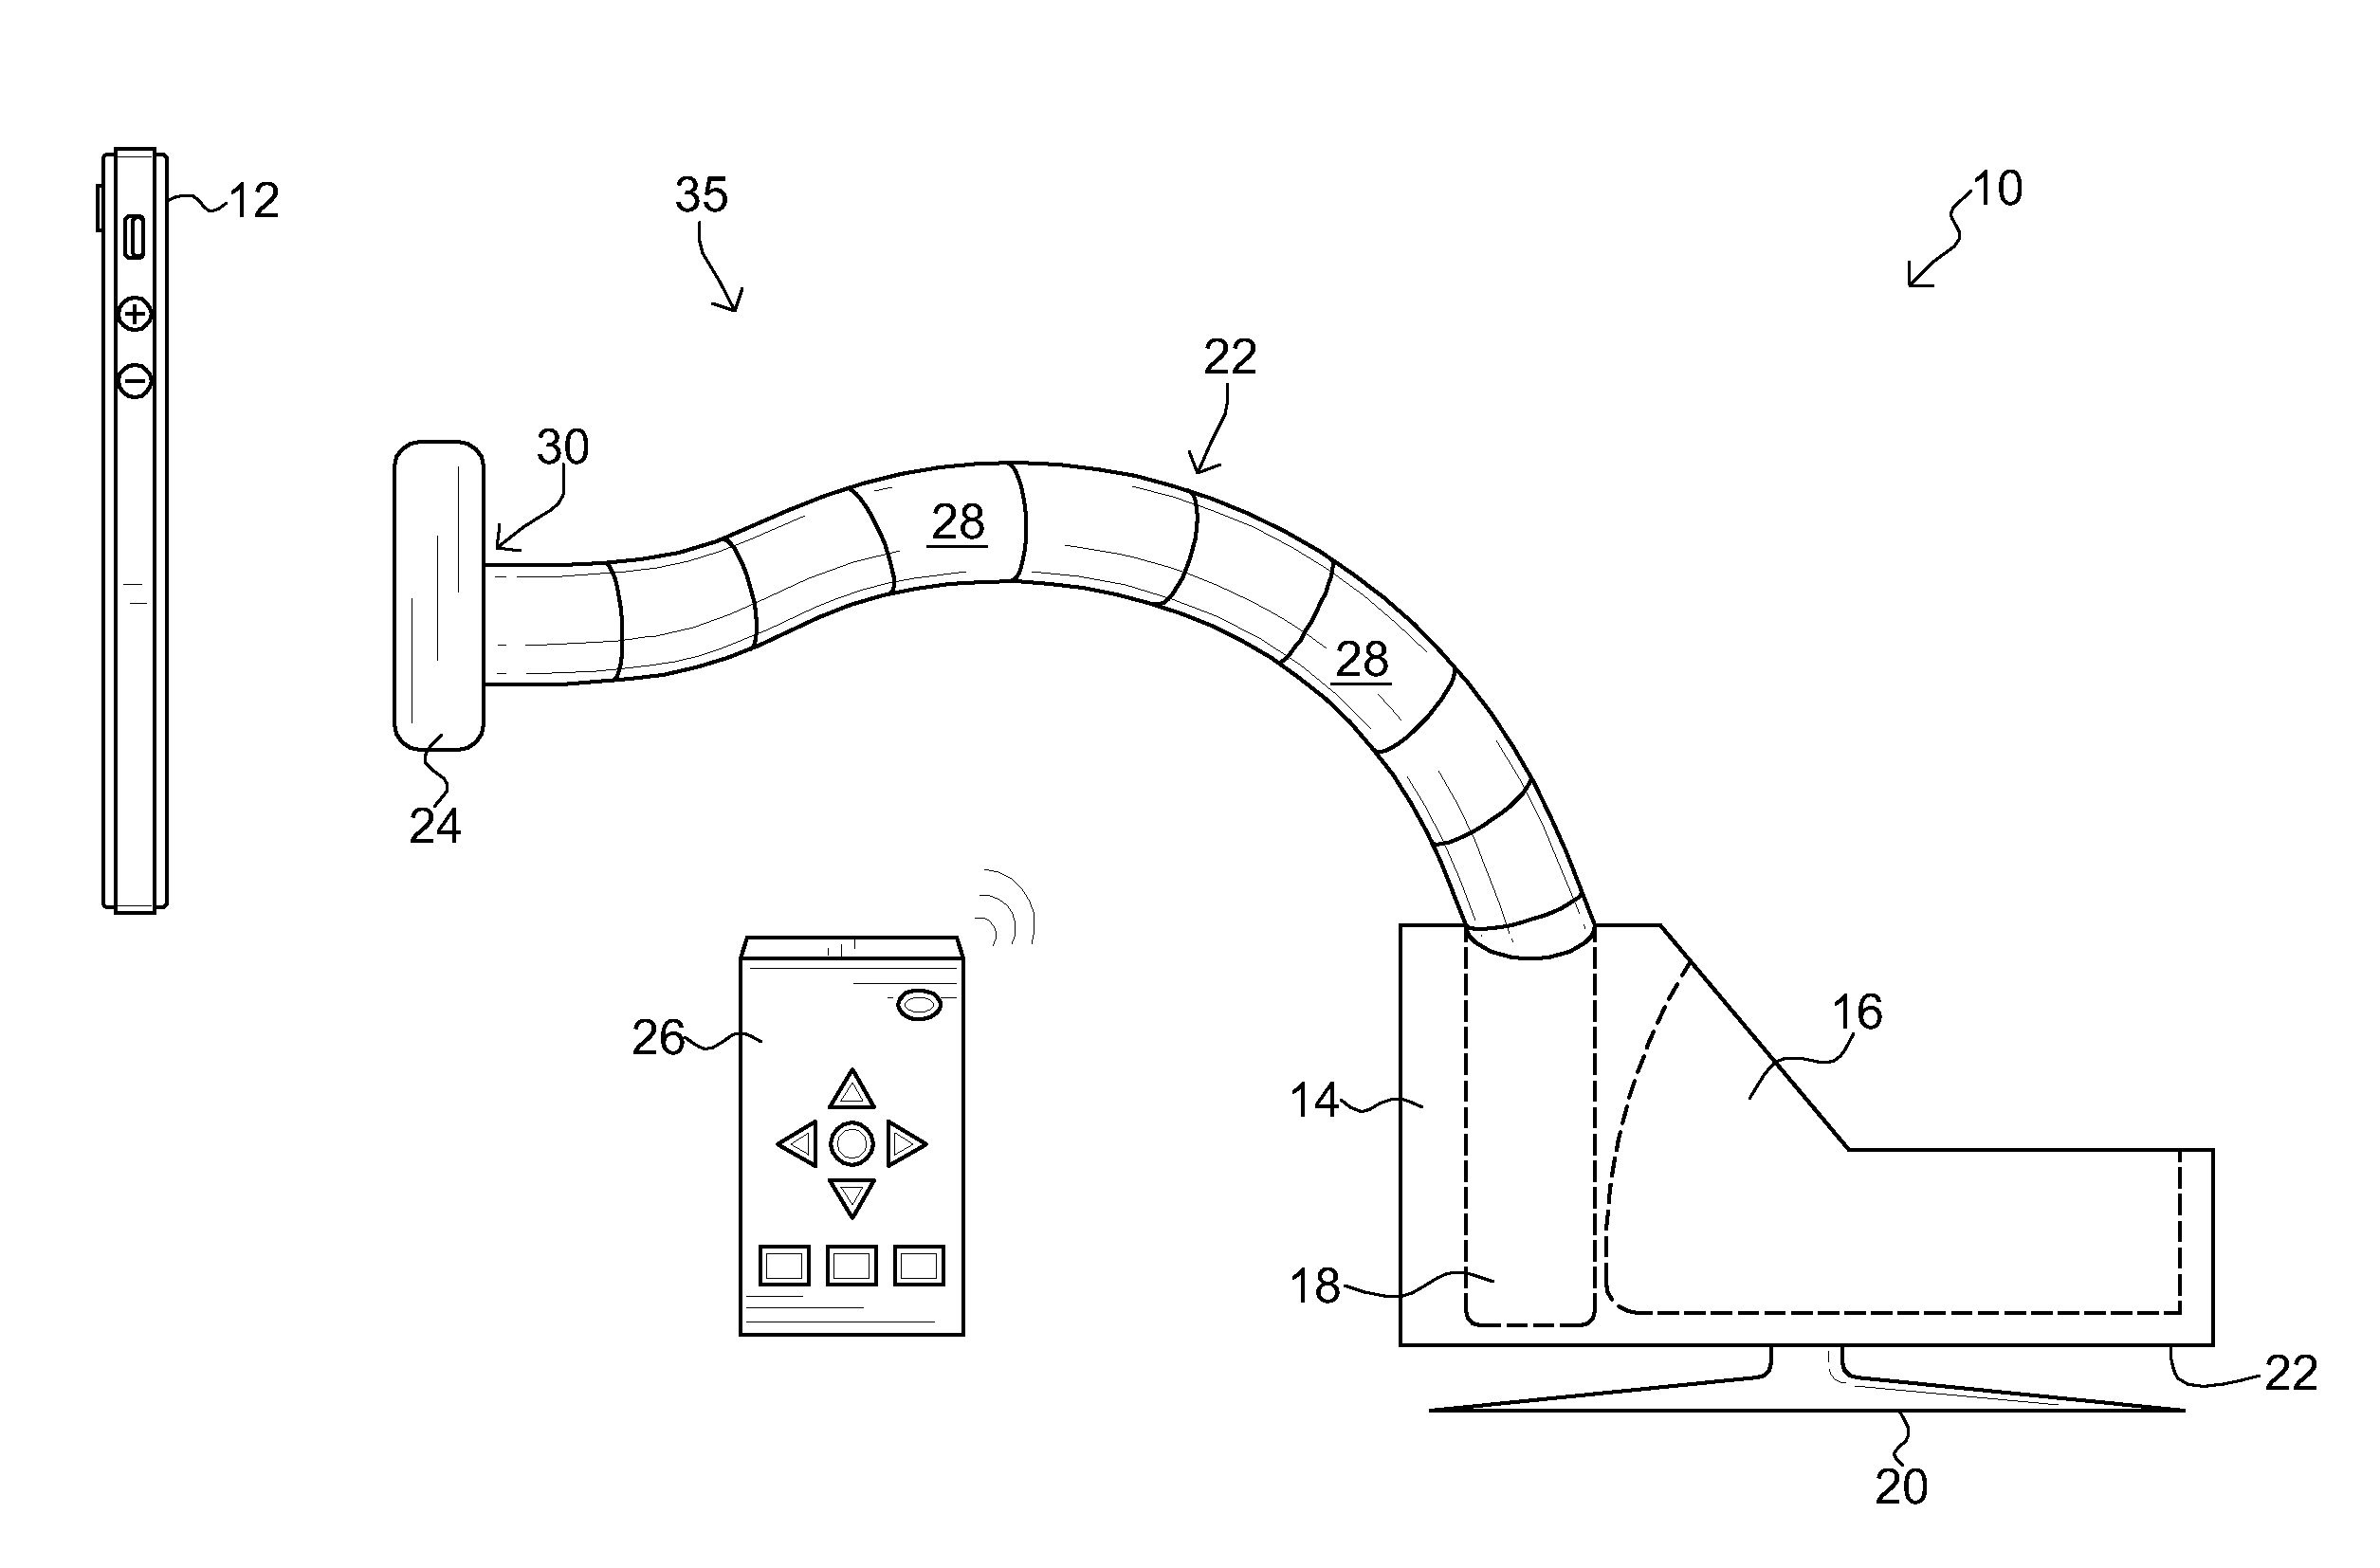 Apparatus for holding a portable electronic device